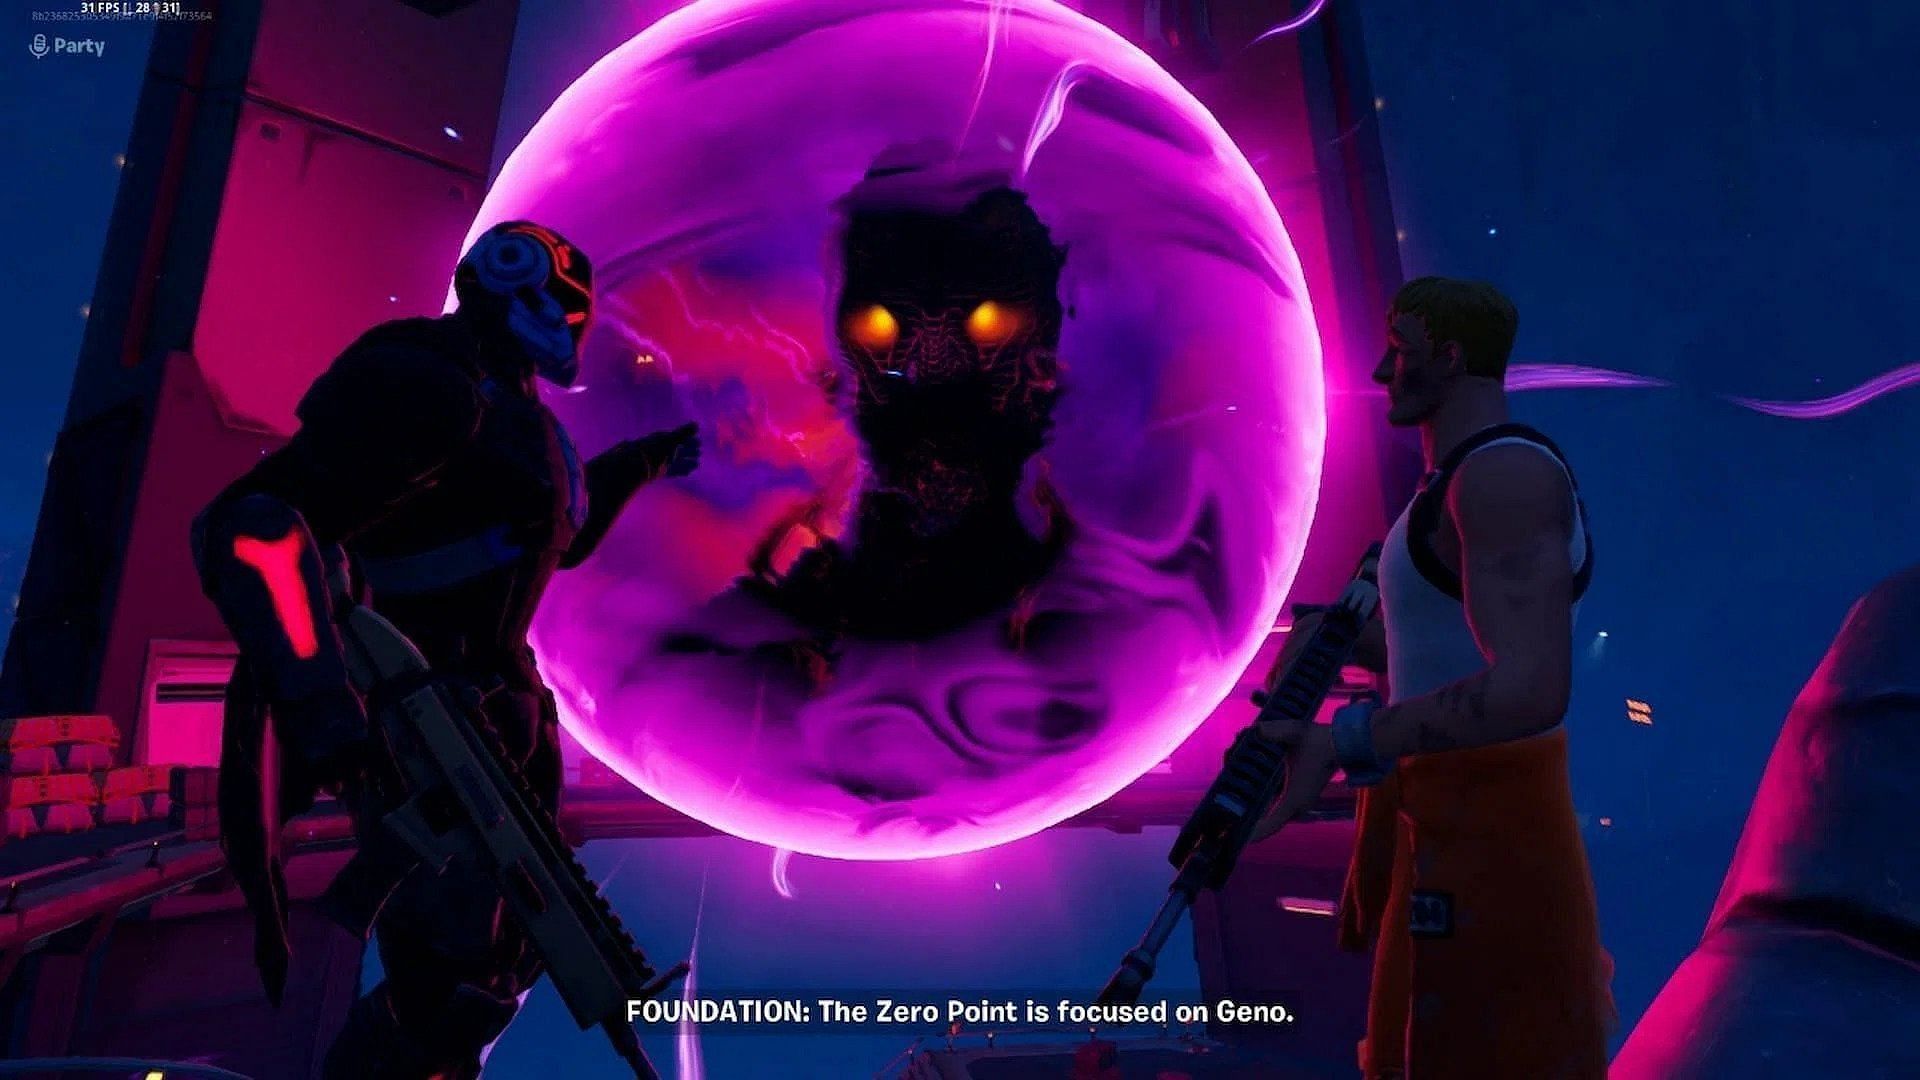 The Foundation has gone looking for Geno in Fortnite (Image via Epic Games)